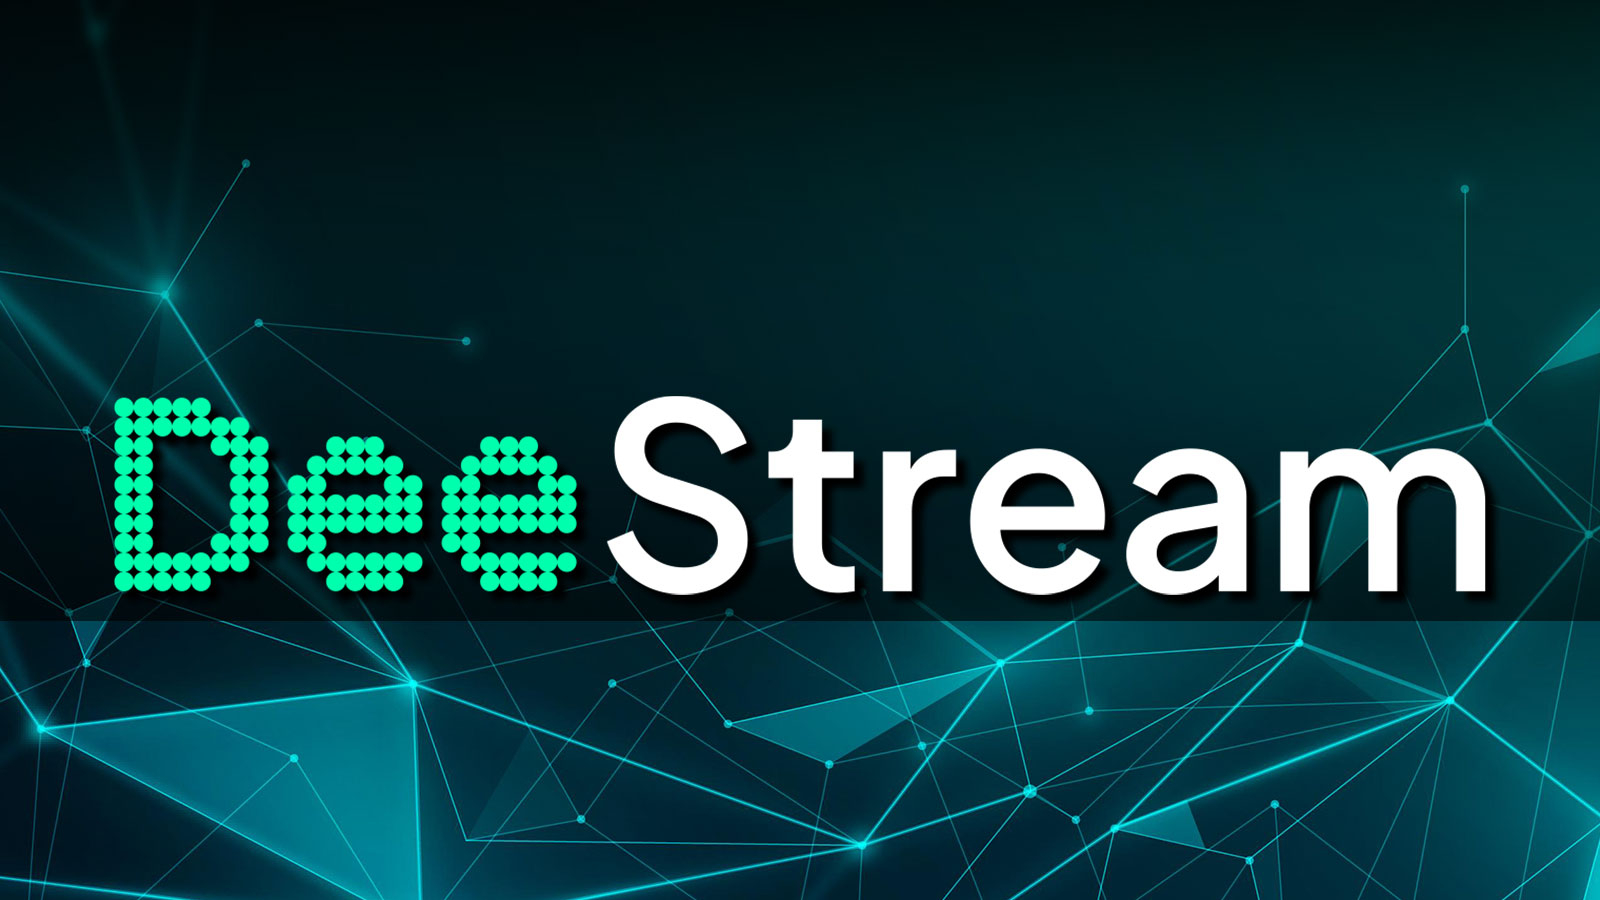 DeeStream (DST) Asset Pre-Sale Might be Welcoming New Supporters in March as Bitcoin (BTC), Ethereum (ETH) Top Altcoins Recovering